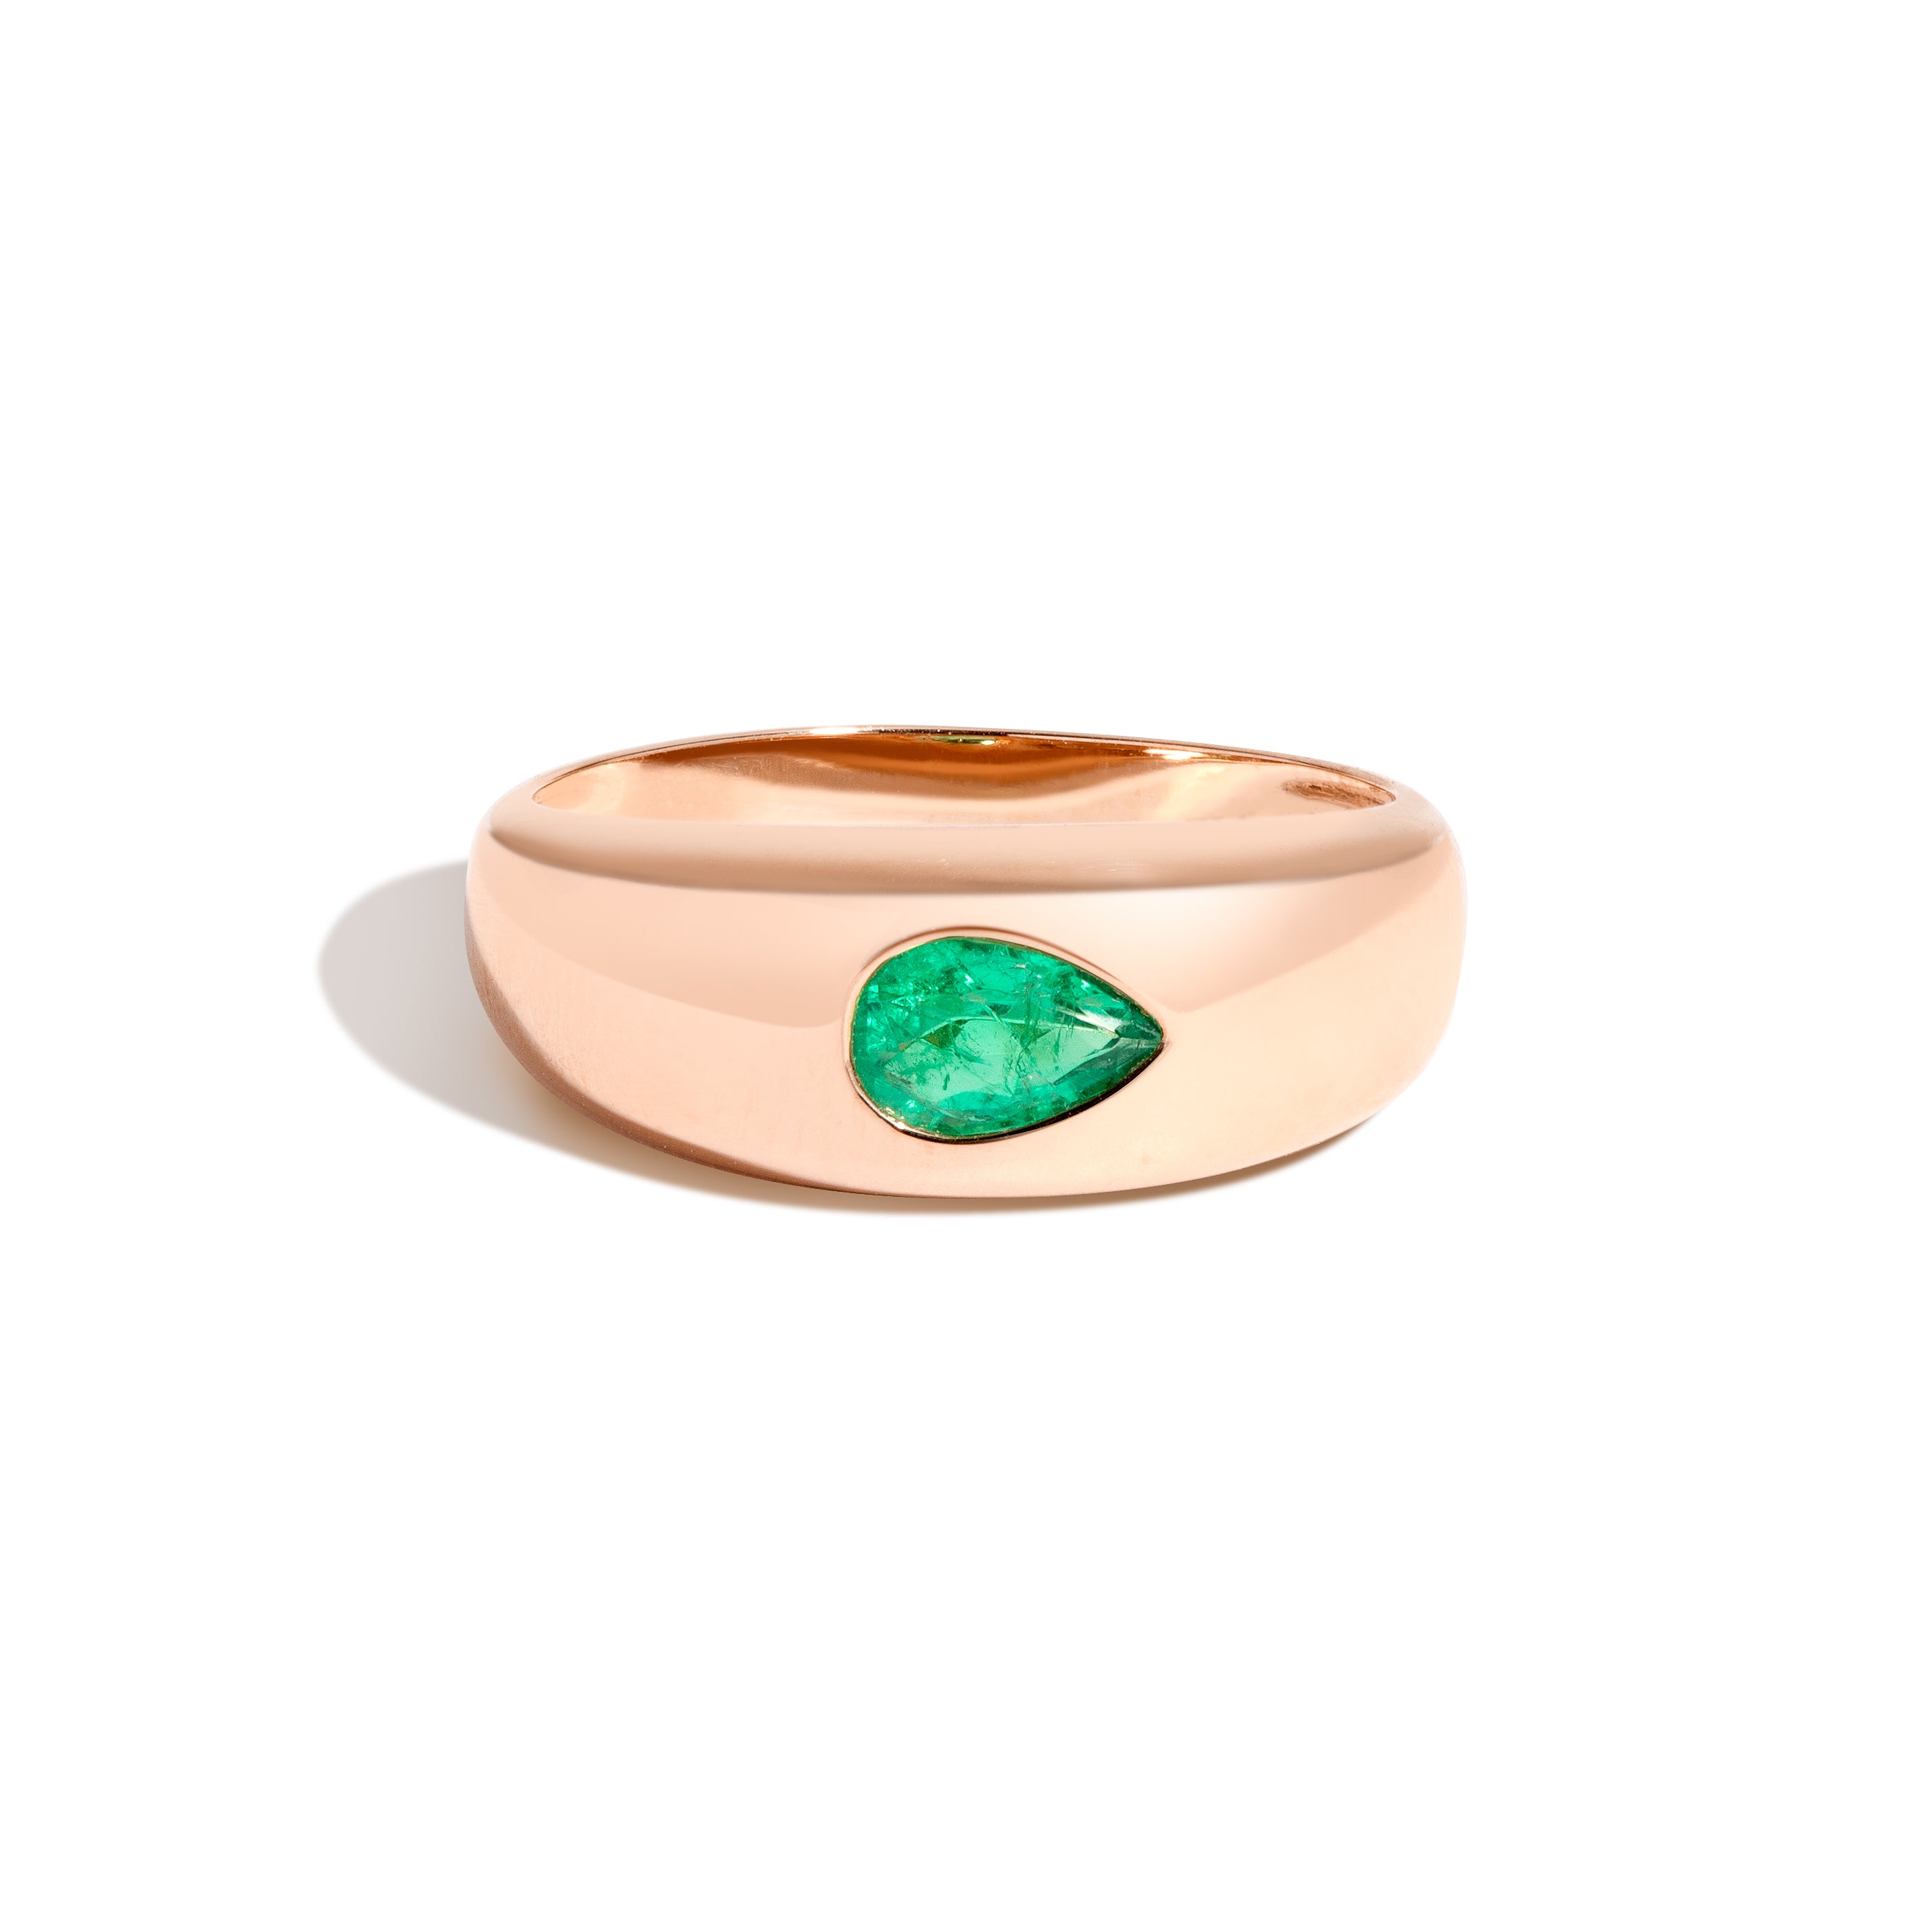 Shahla Karimi Bombe Ring With Pear Emerald 14K Rose Gold